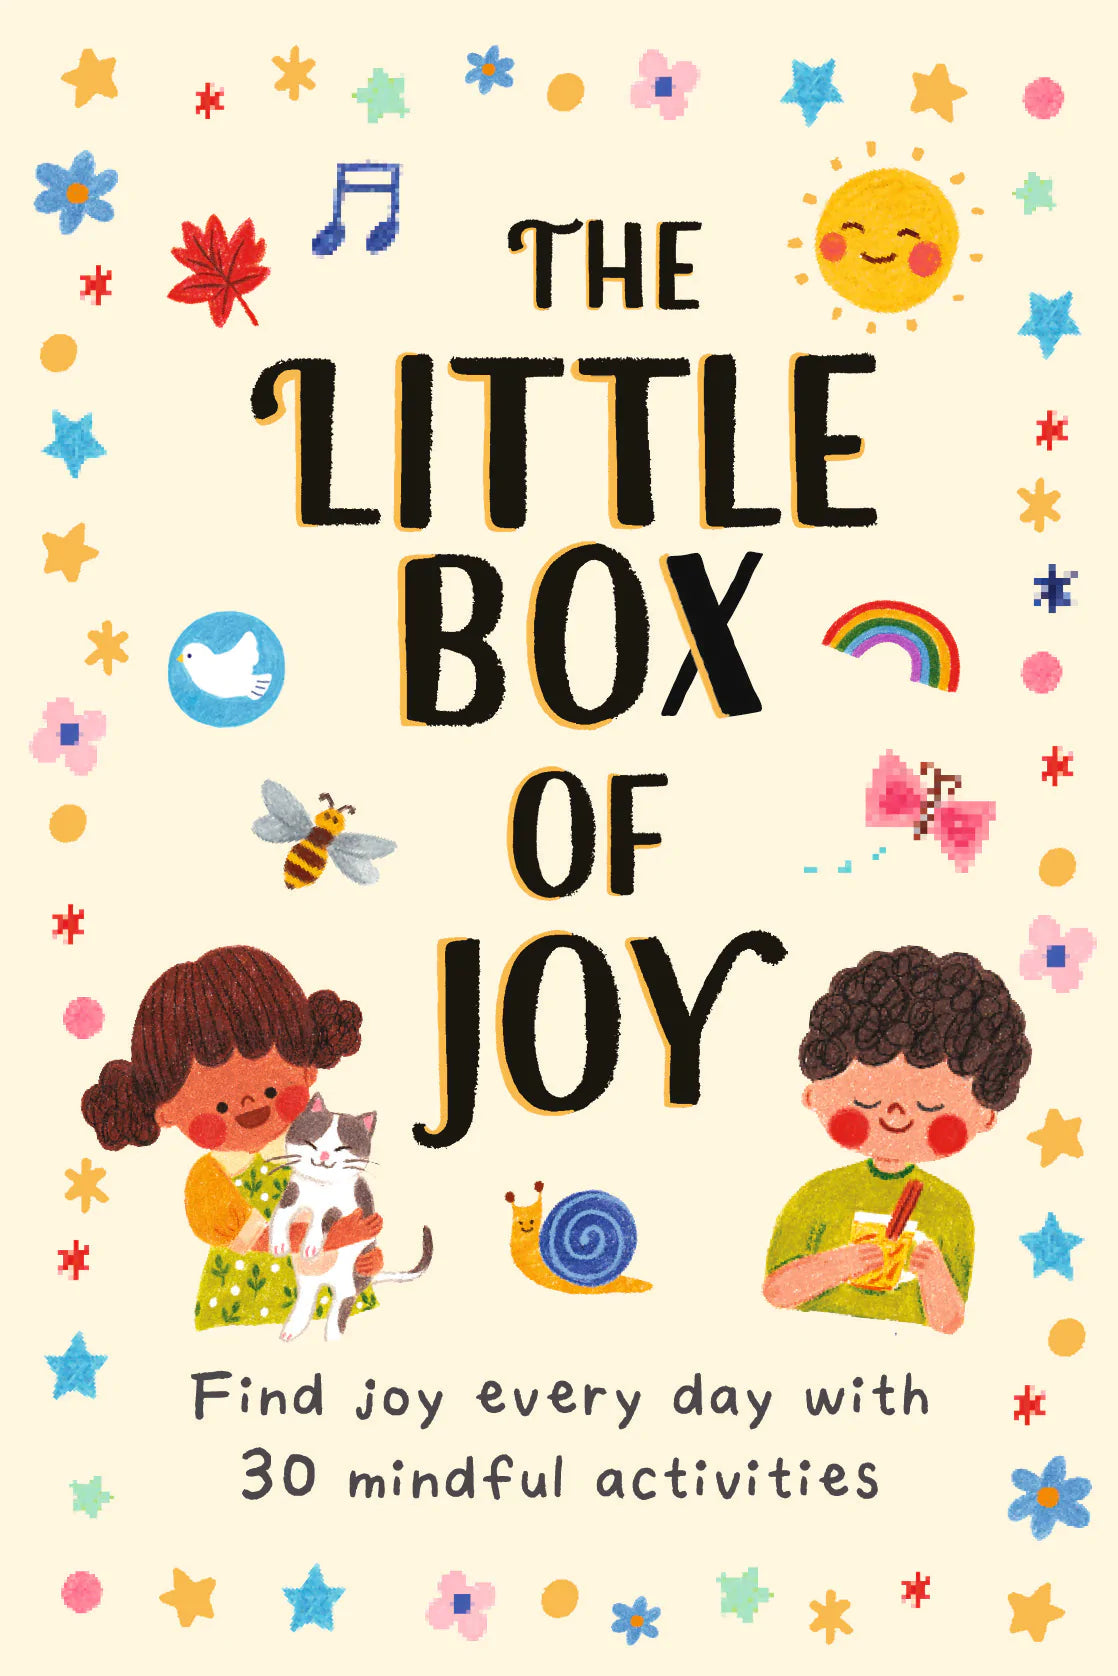 The Little Box of Joy: Find Joy Every Day With Mindful Activities